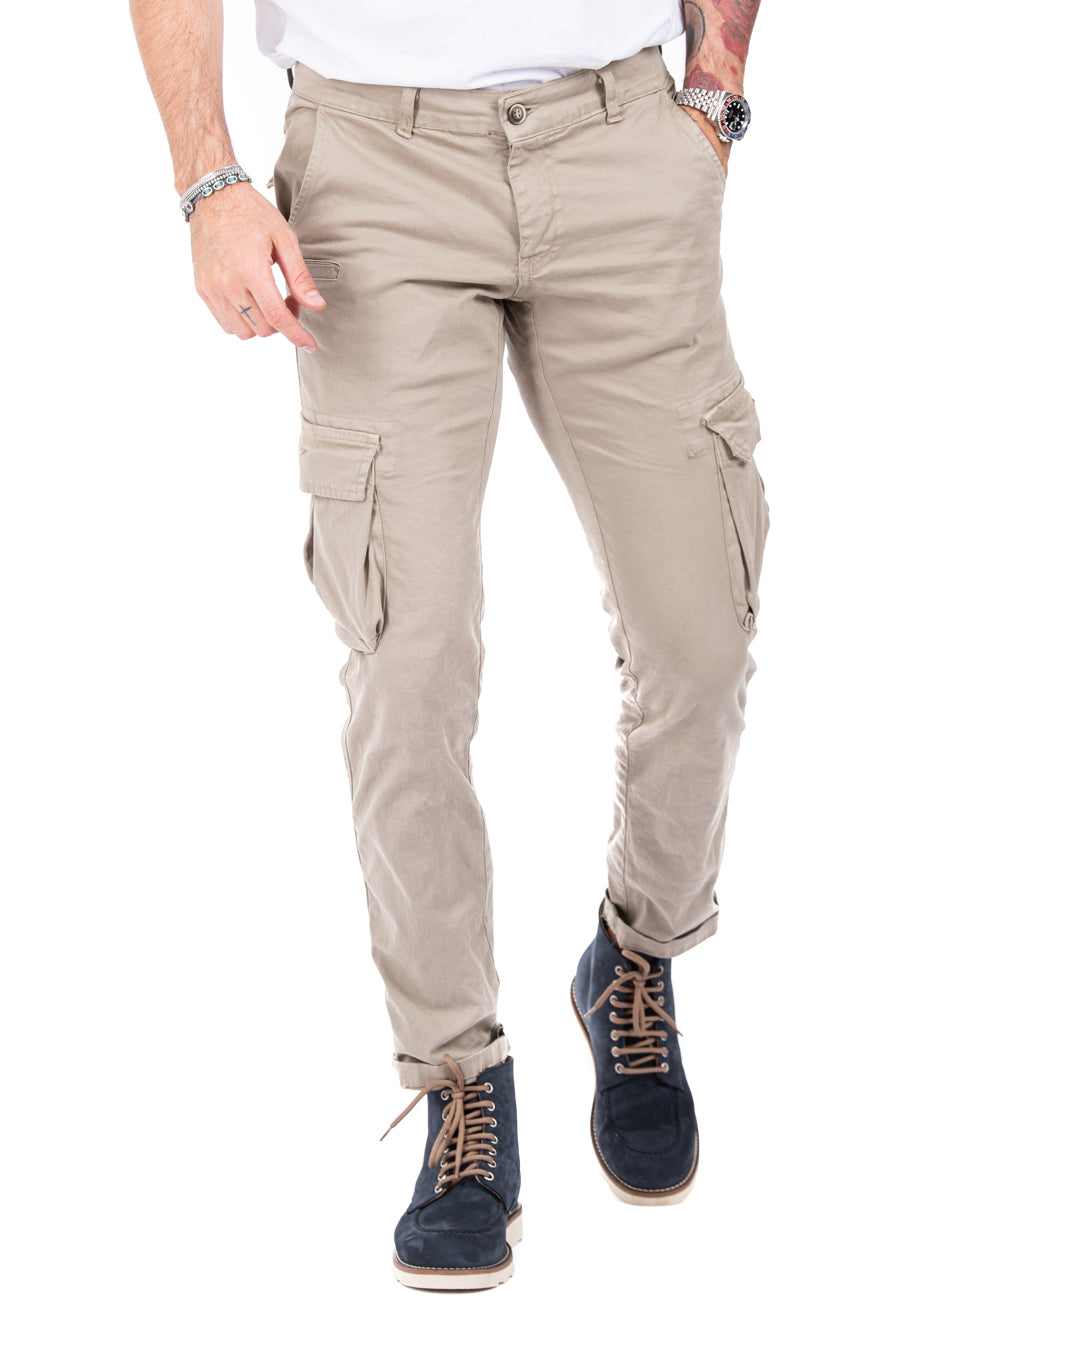 Roy - twine cargo trousers